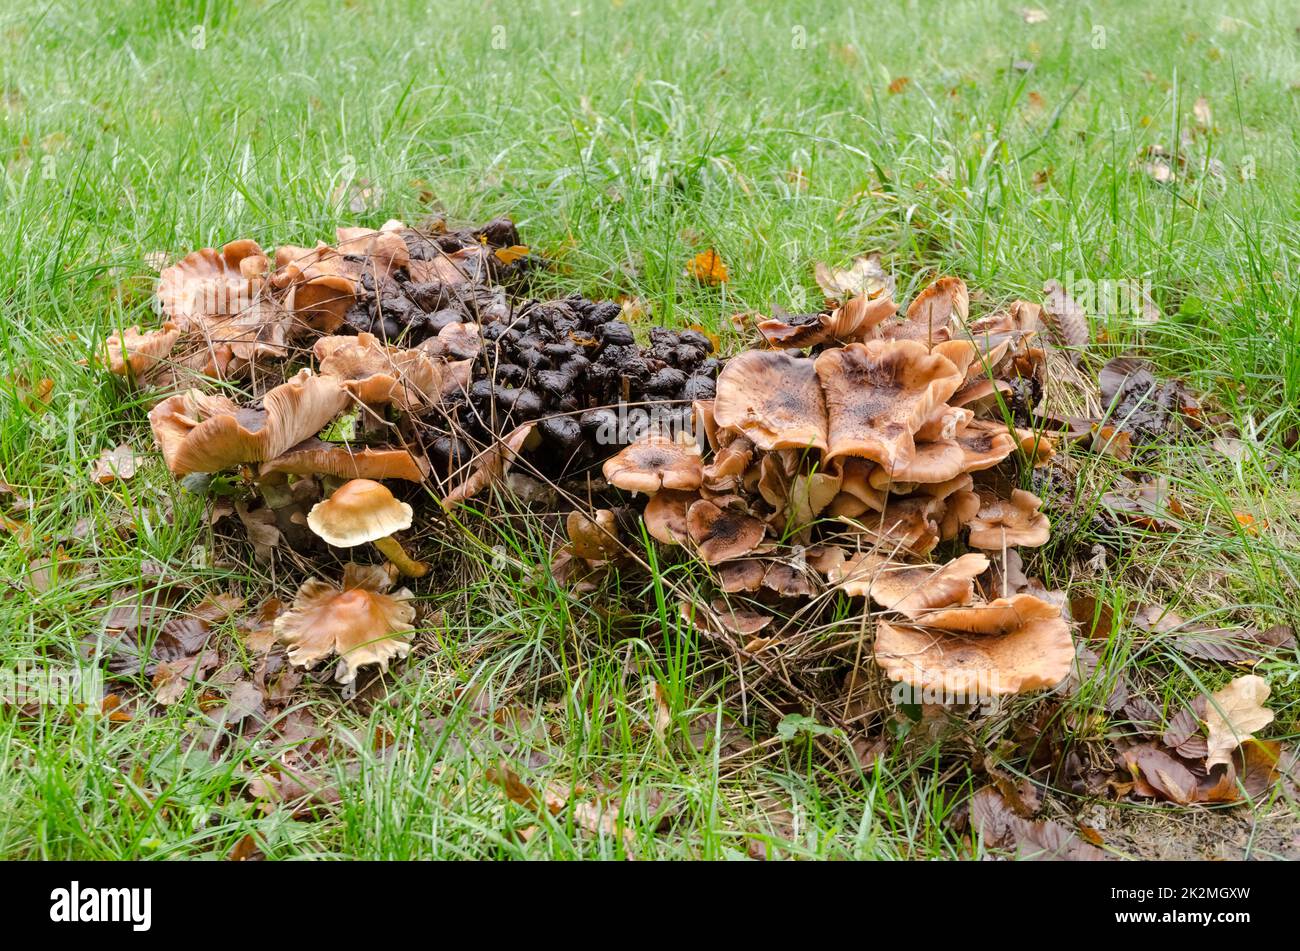 Mushrooms growing in a meadow near a forest in Germany, Europe Stock Photo